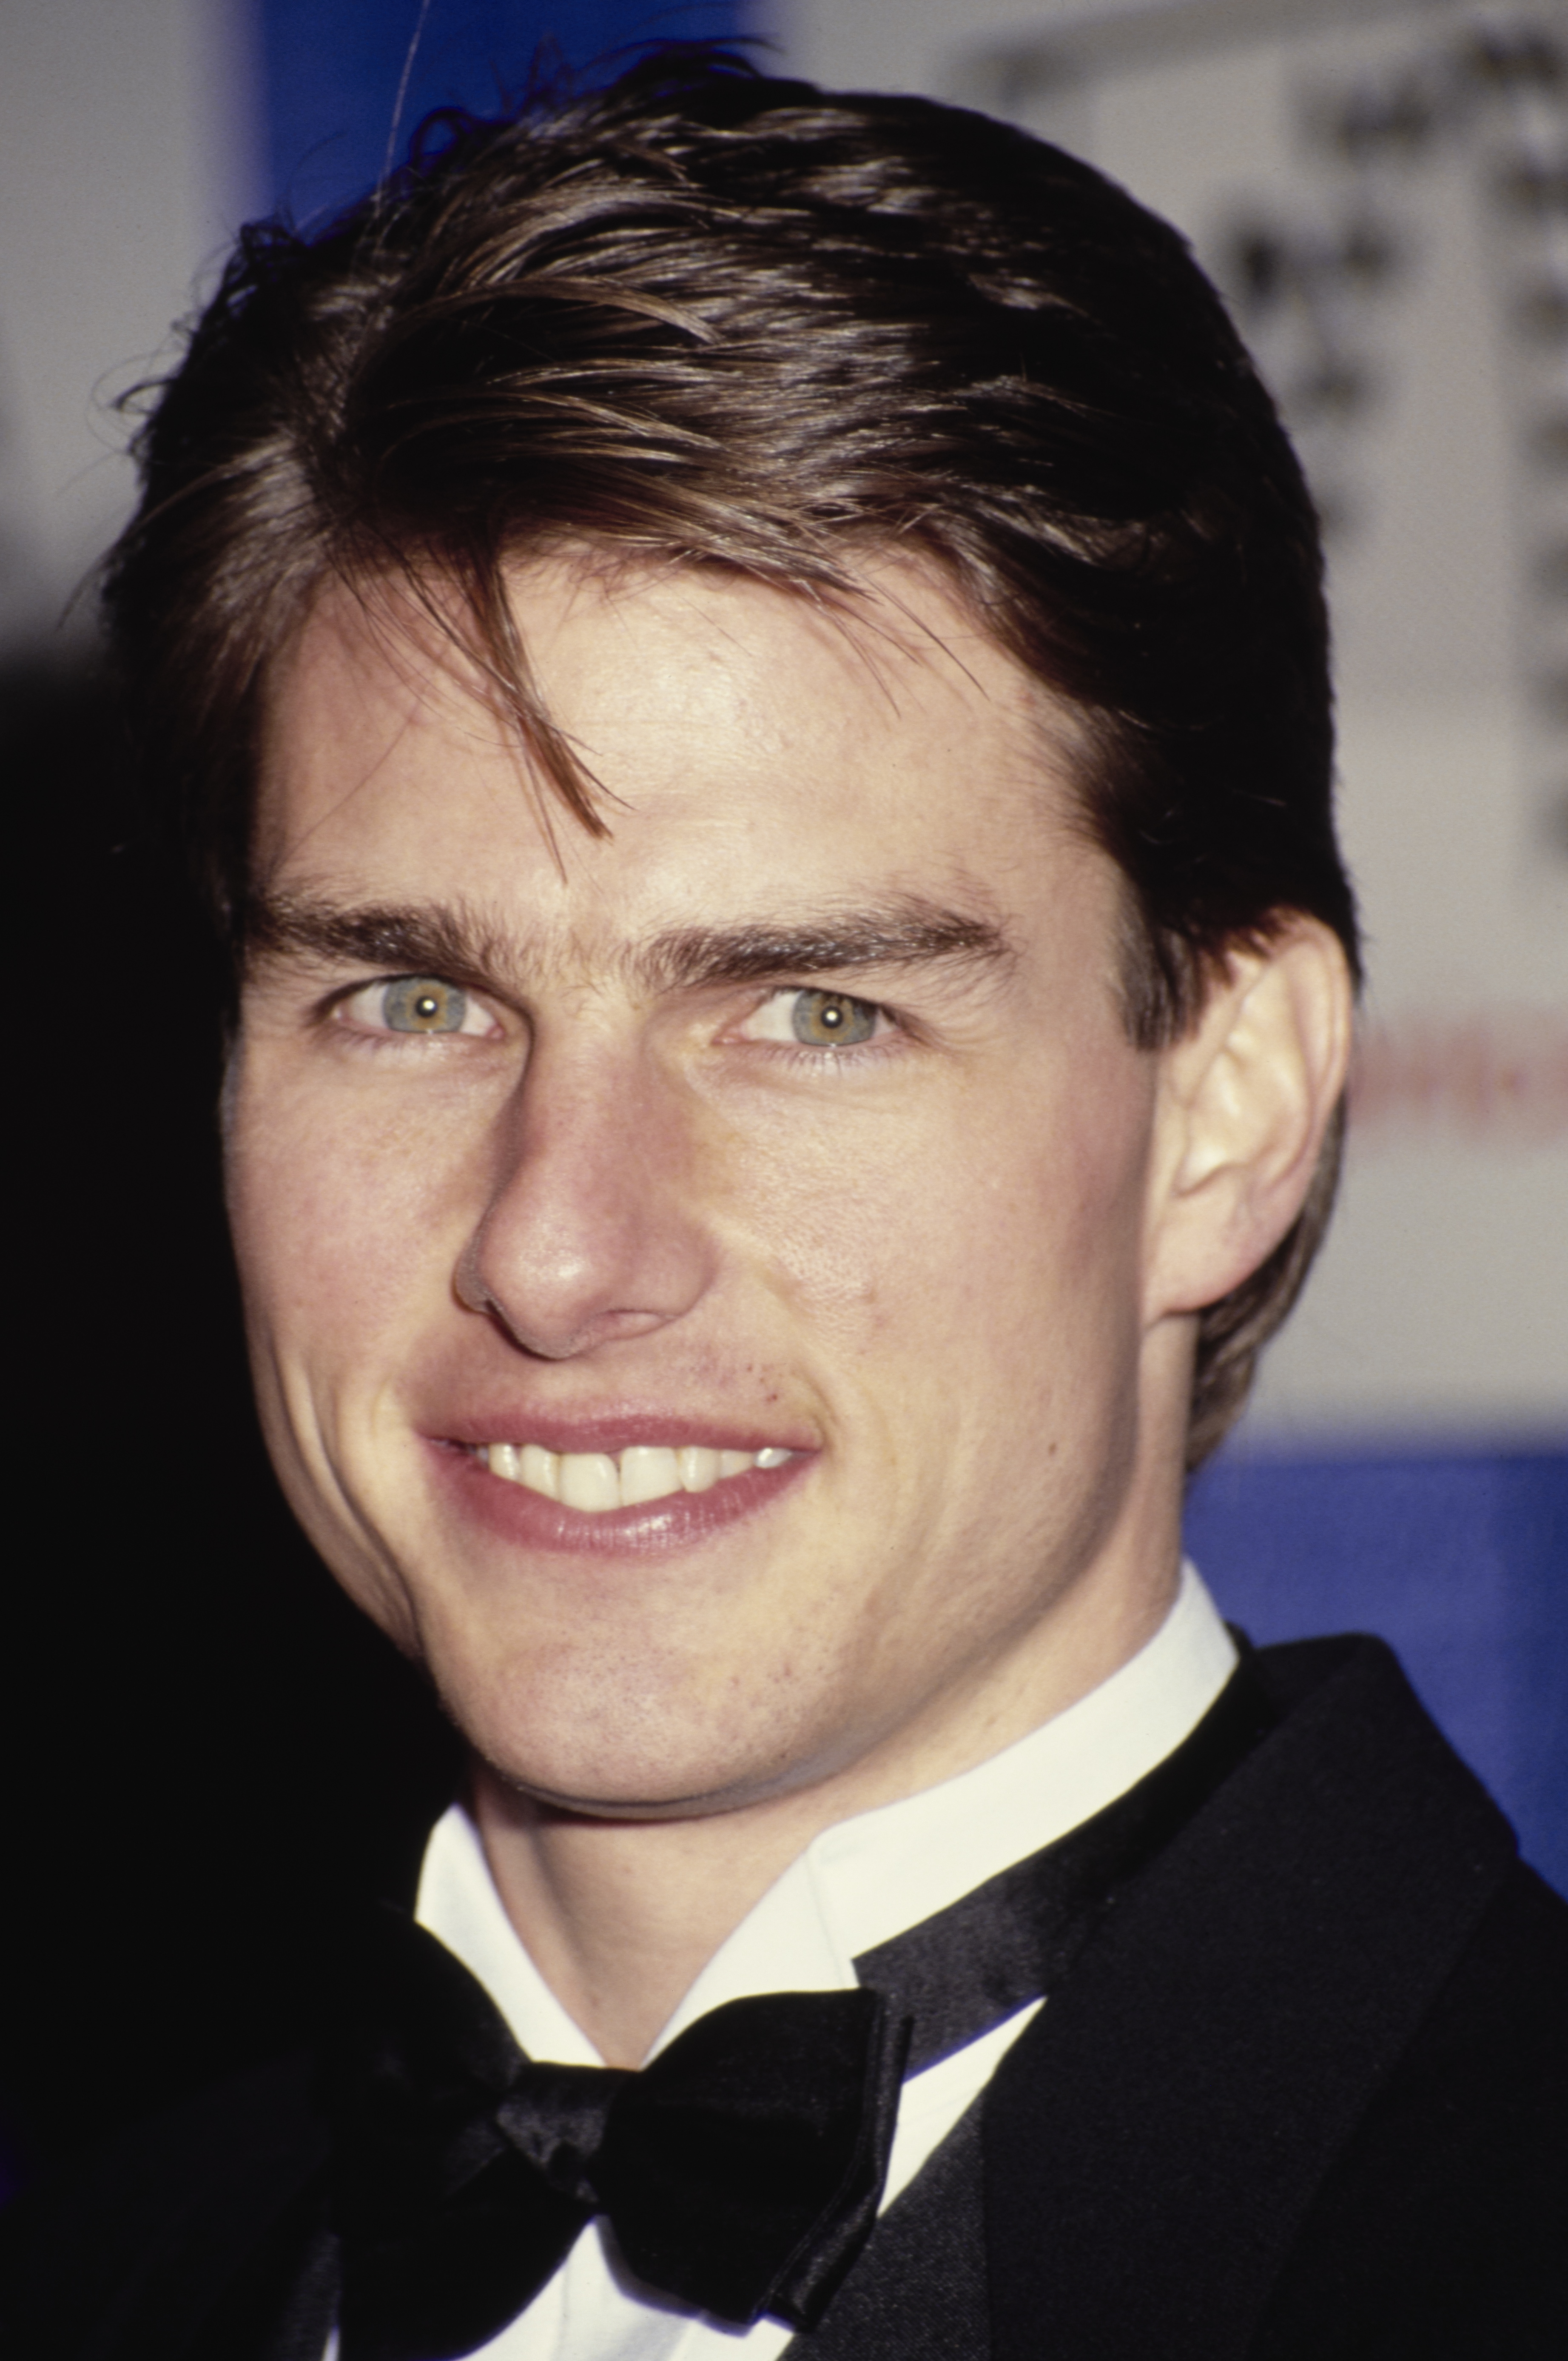 Tom Cruise during the 8th Annual American Cinema Awards at the Beverly Hilton Hotel in Beverly Hills, California, on January 12, 1991. | Source: Getty Images